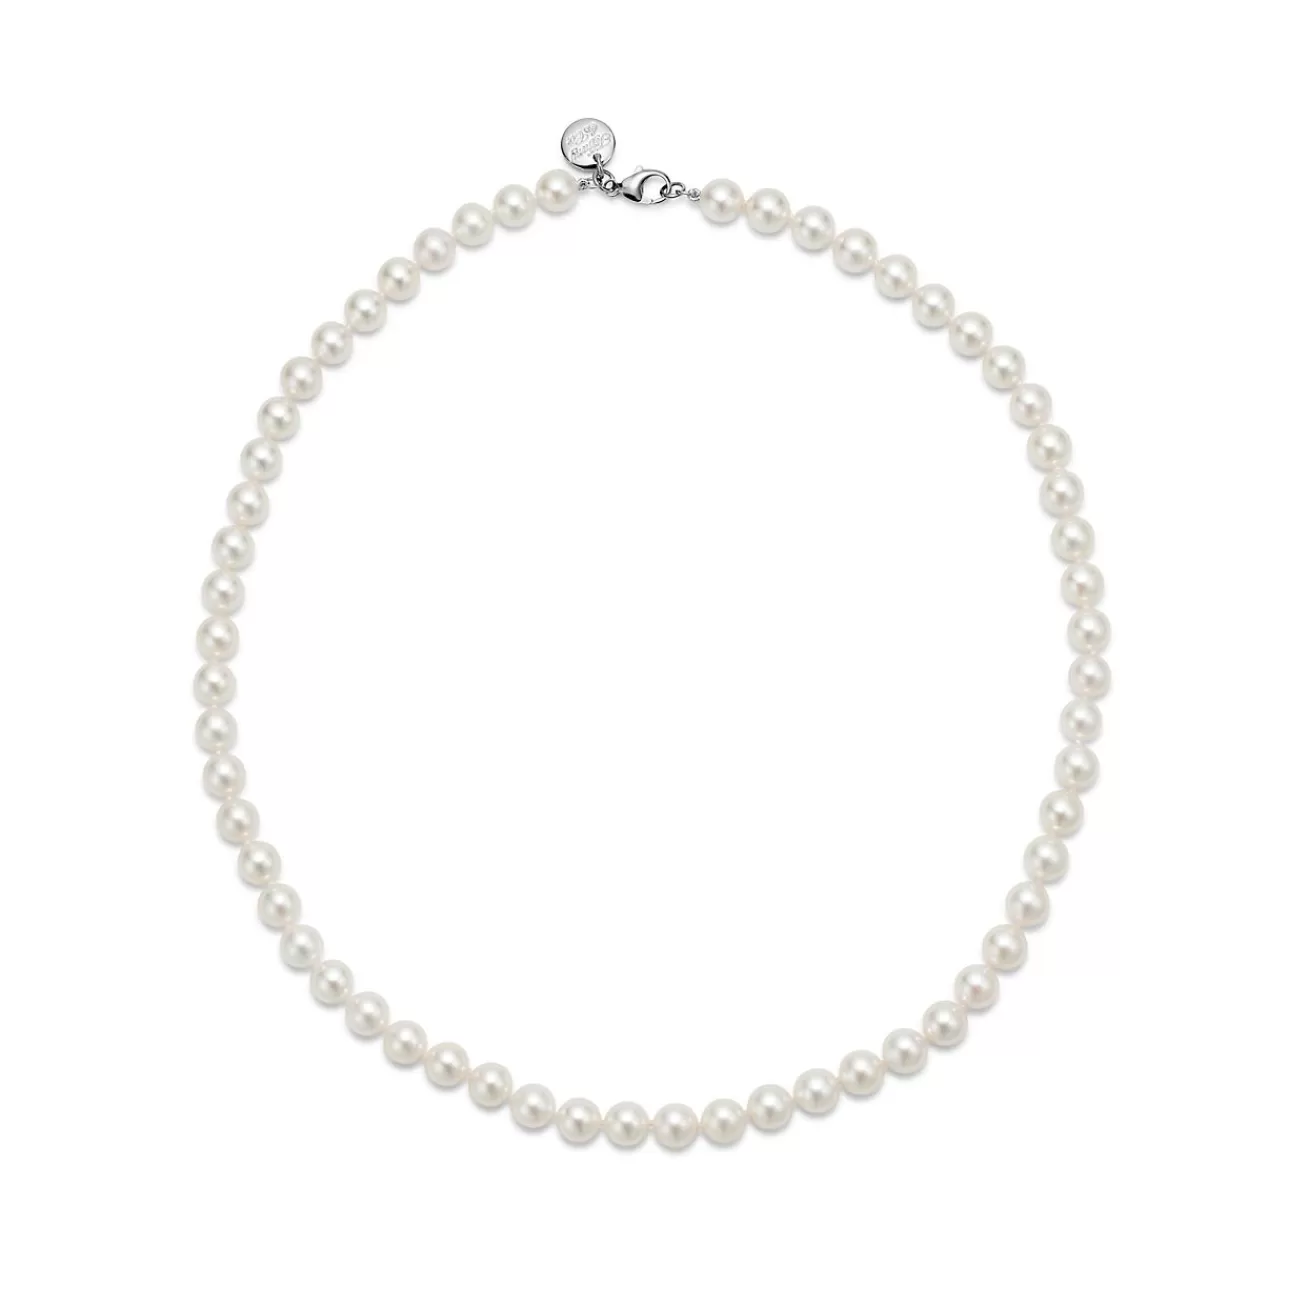 Tiffany & Co. Tiffany Essential Pearls necklace of Akoya pearls with an 18k white gold clasp. | ^ Necklaces & Pendants | Pearl Jewelry